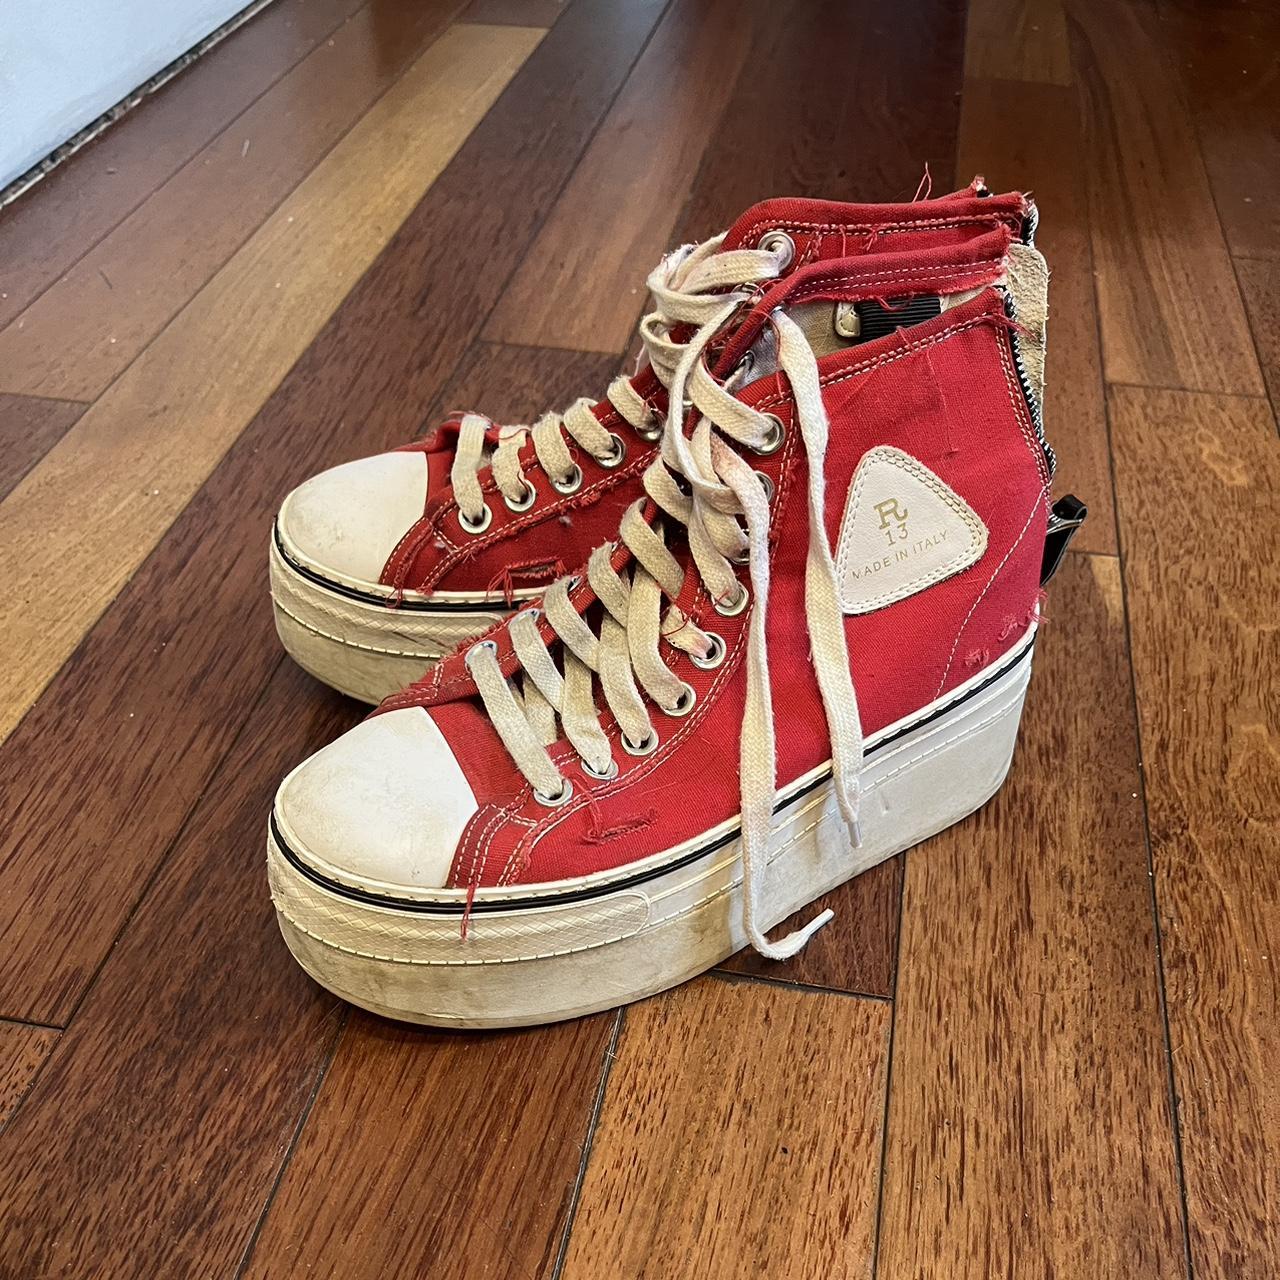 R13 Red Courtney High Top Platform Sneakers Size US... - Depop